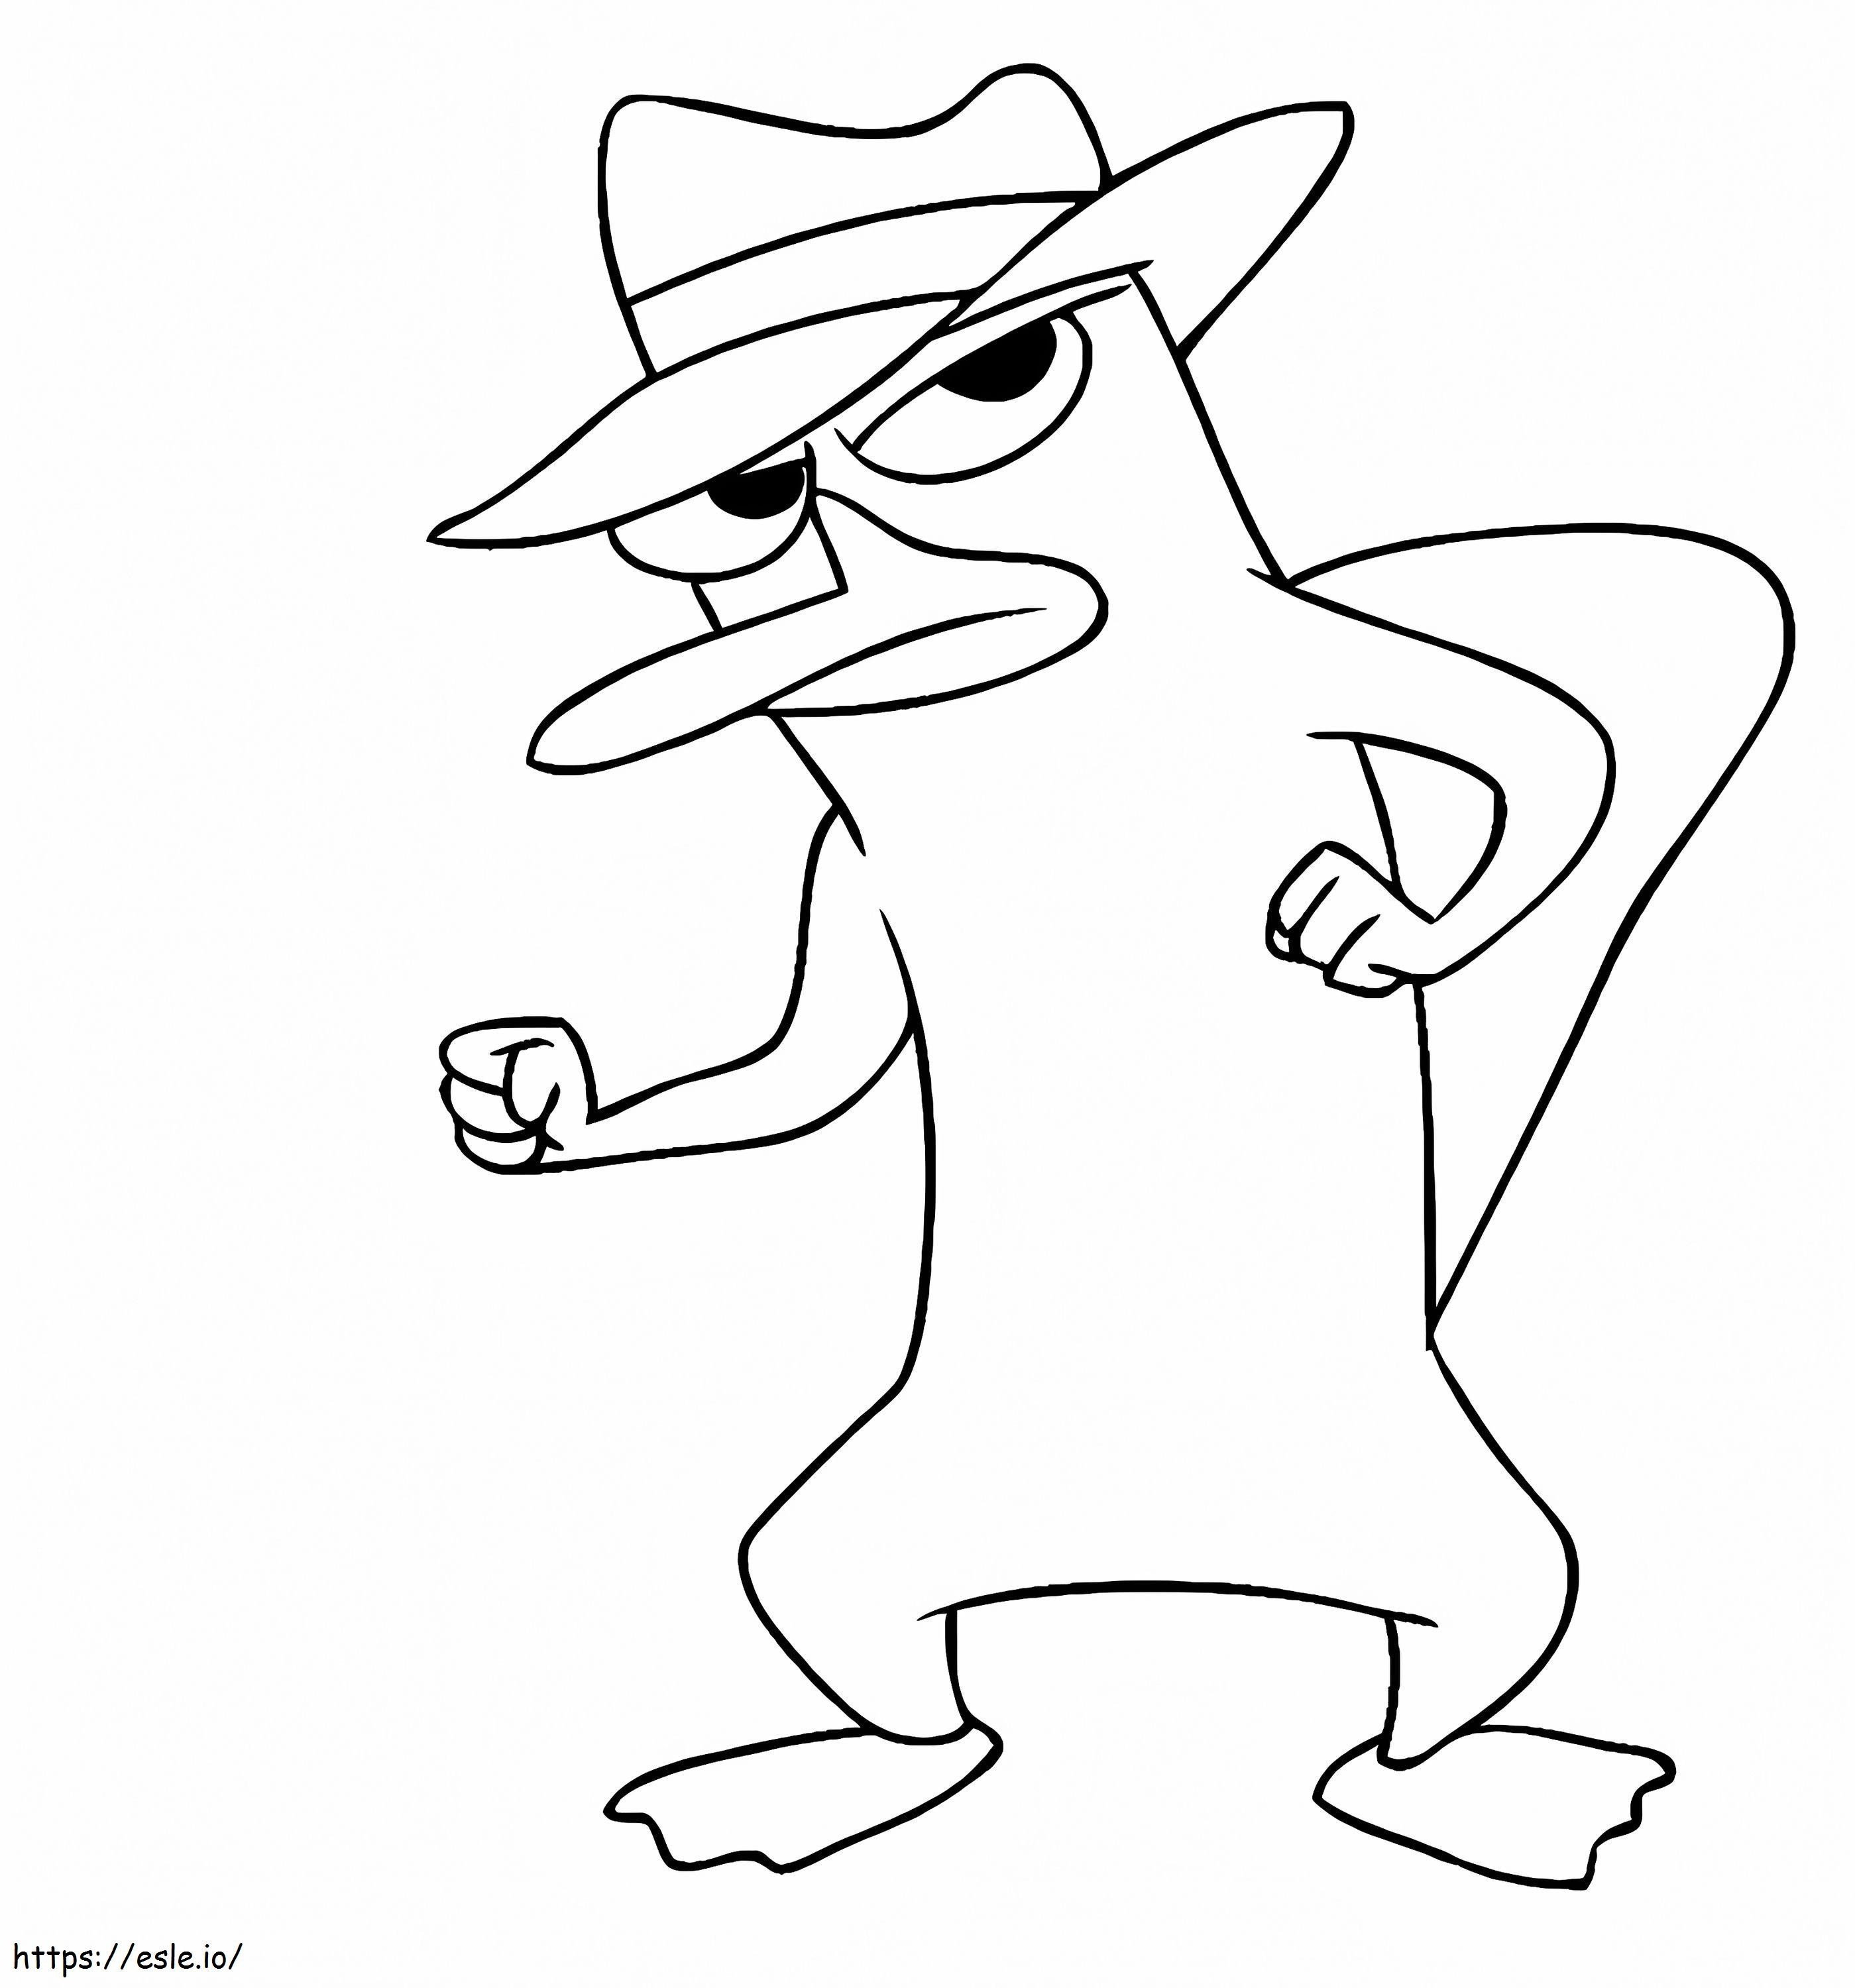 Agentp coloring page